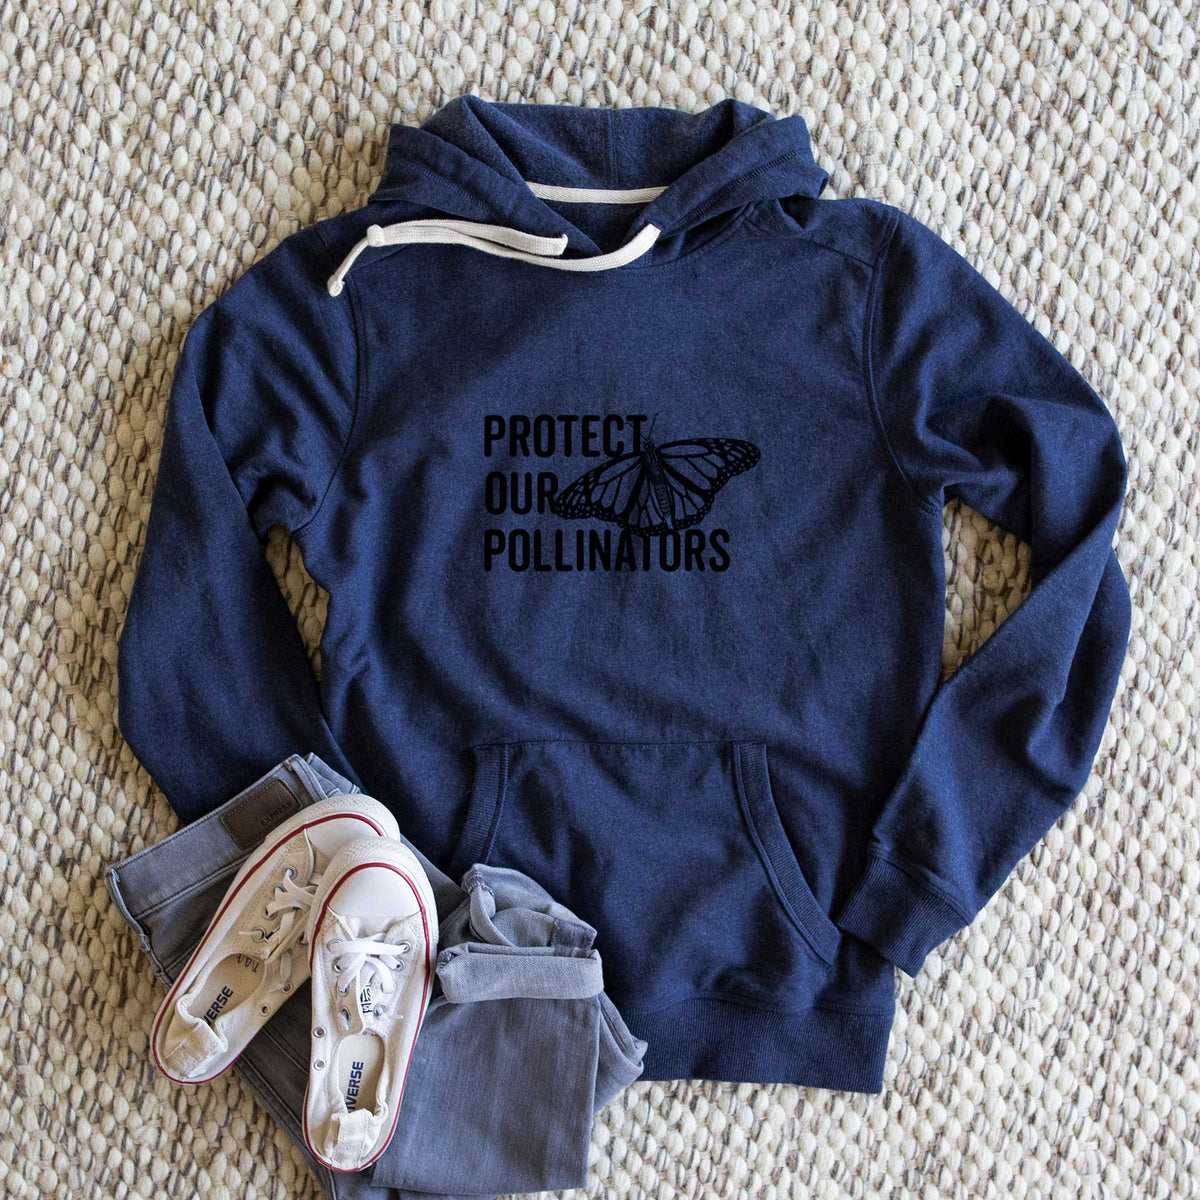 Protect our Pollinators - Unisex Recycled Hoodie - CLOSEOUT - FINAL SALE